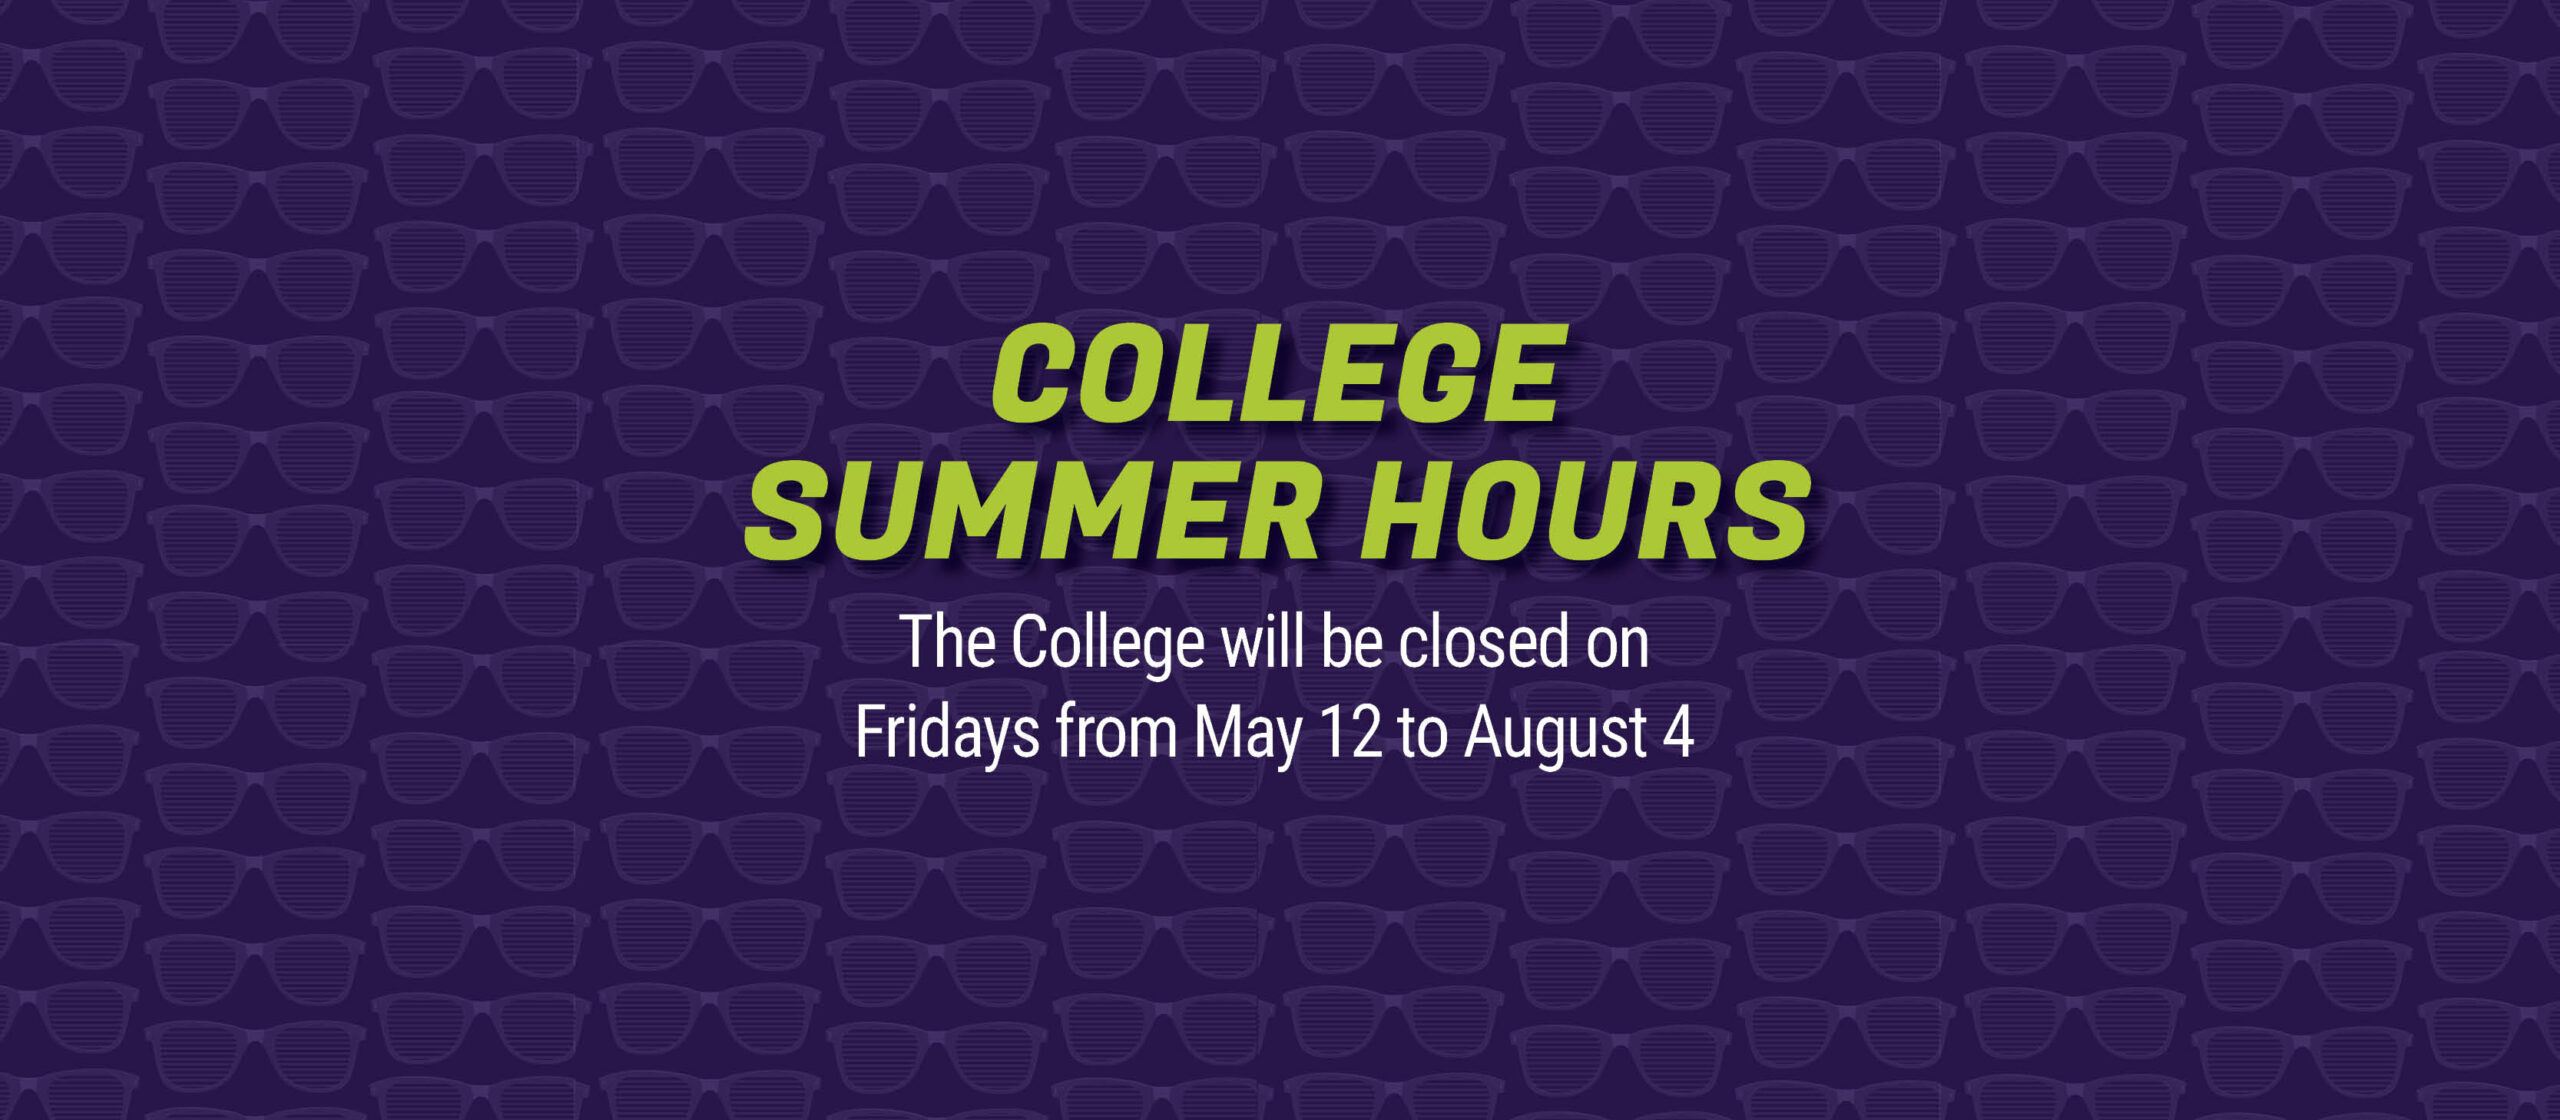 College Summer Hours: The College will be closed on Fridays from May 12 - August 4